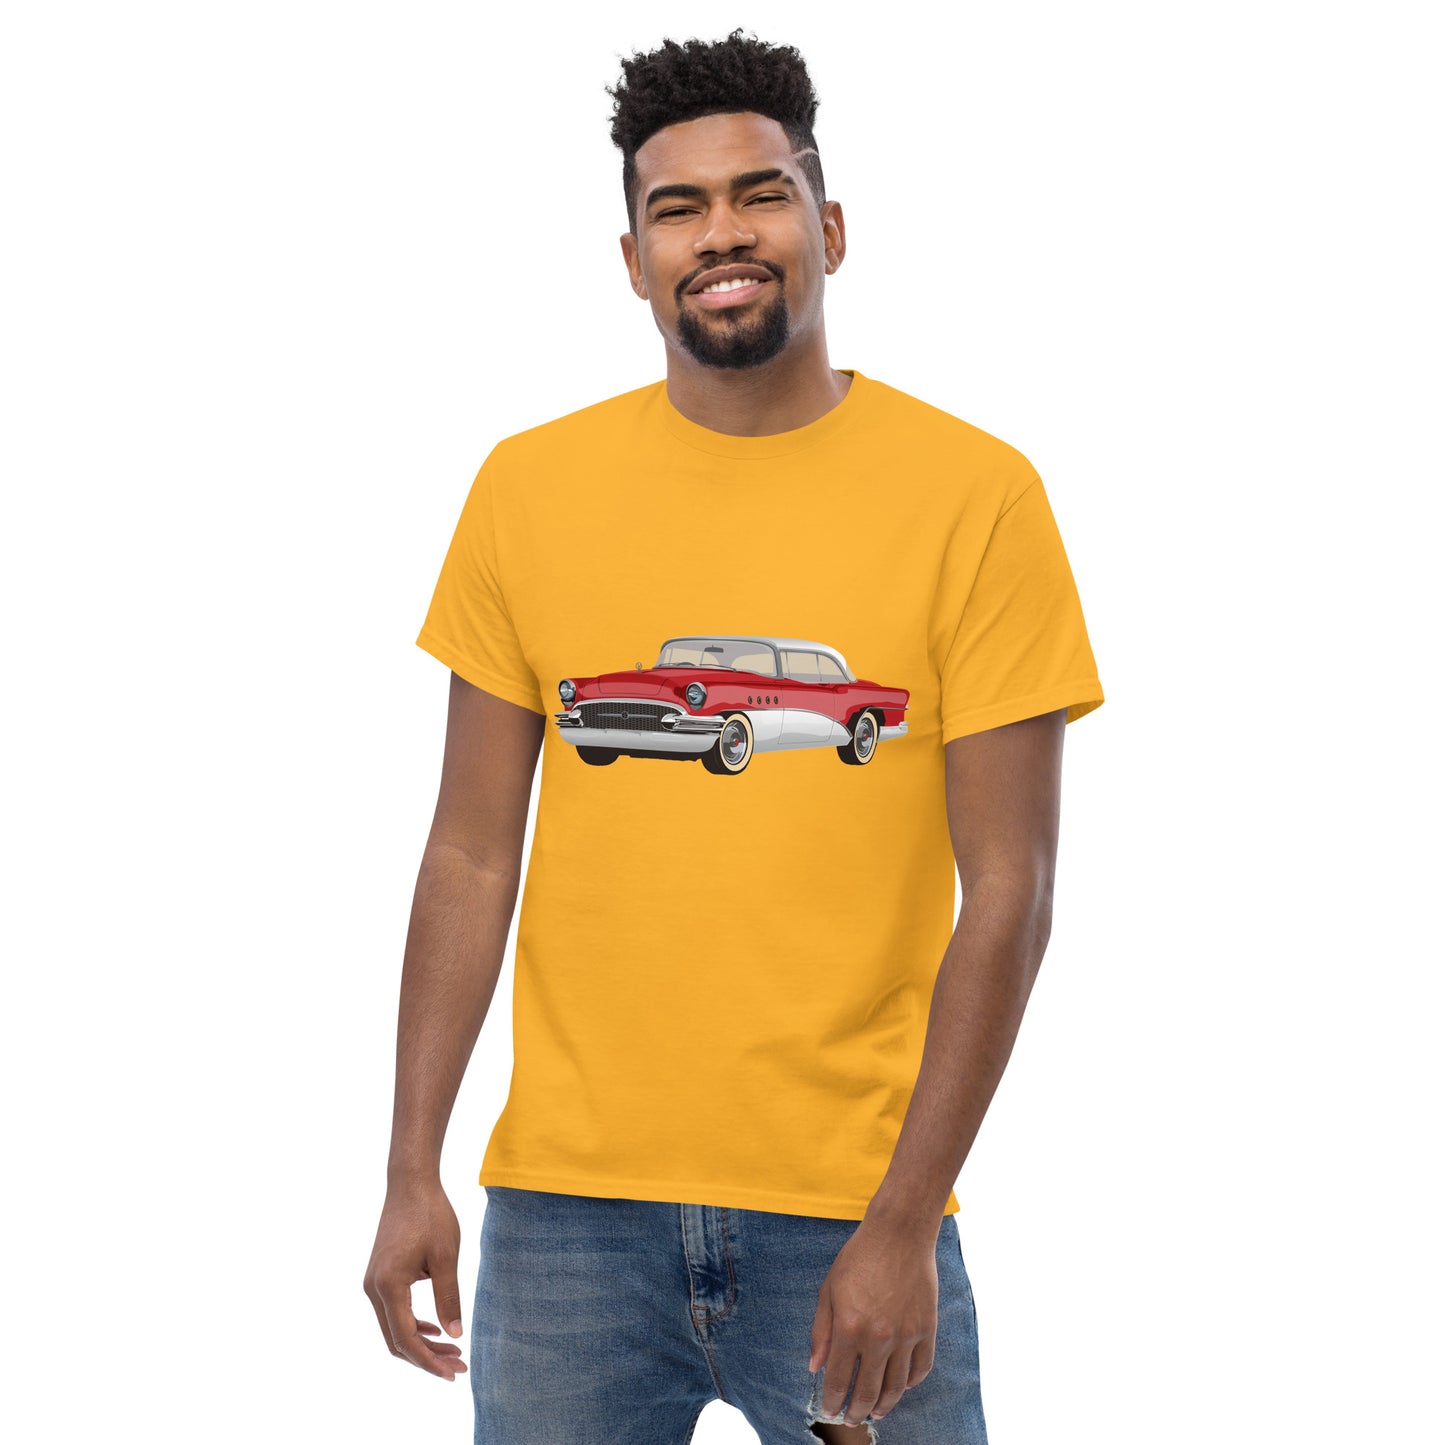 Men with gold t-shirt with red Chevrolet 